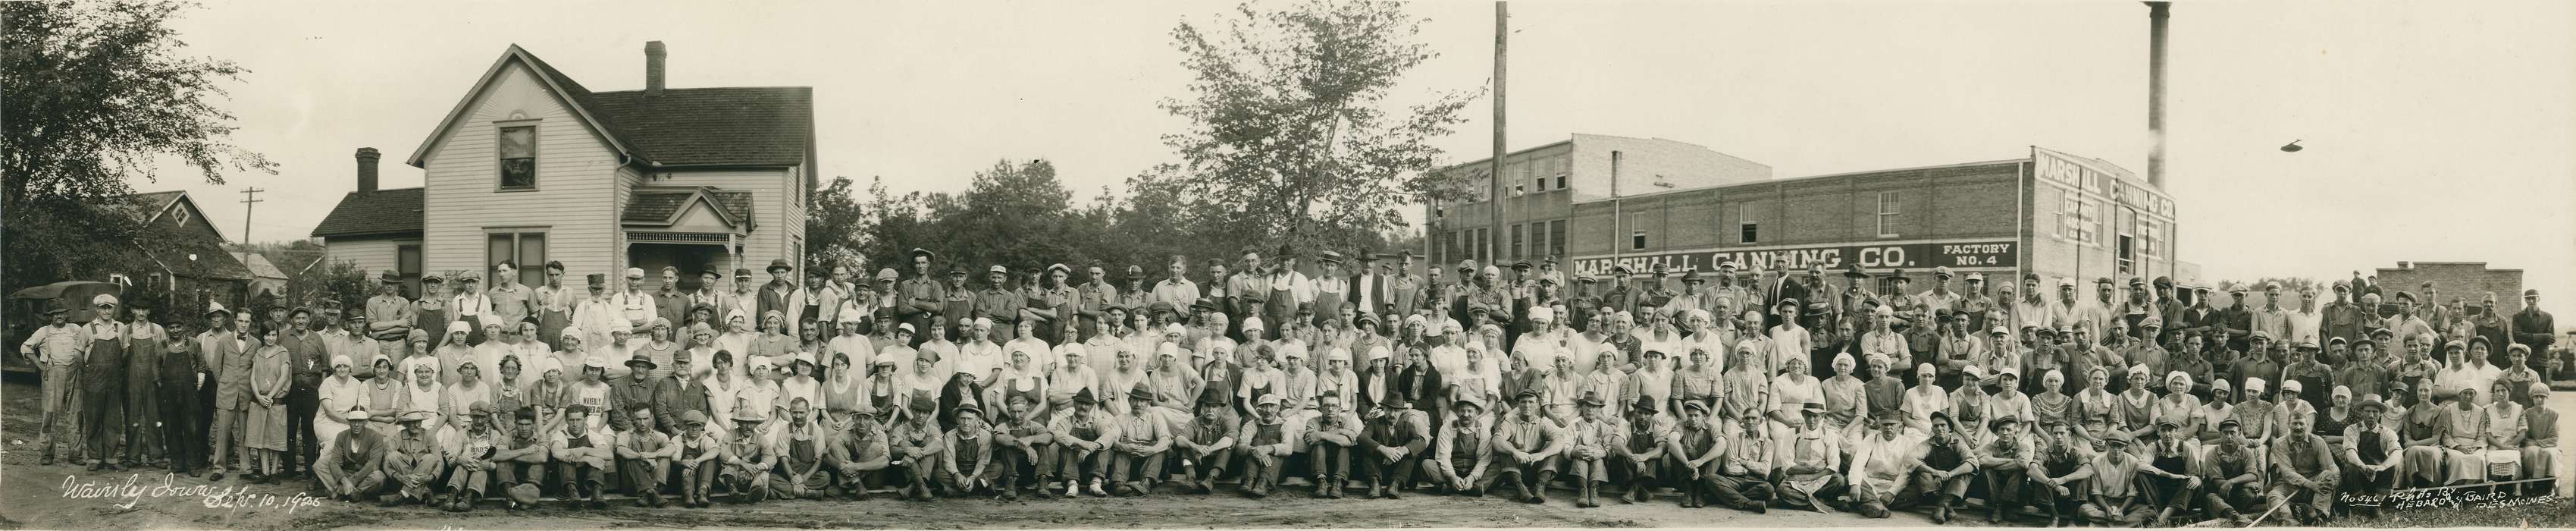 Waverly Public Library, Portraits - Group, Businesses and Factories, history of Iowa, Iowa, Iowa History